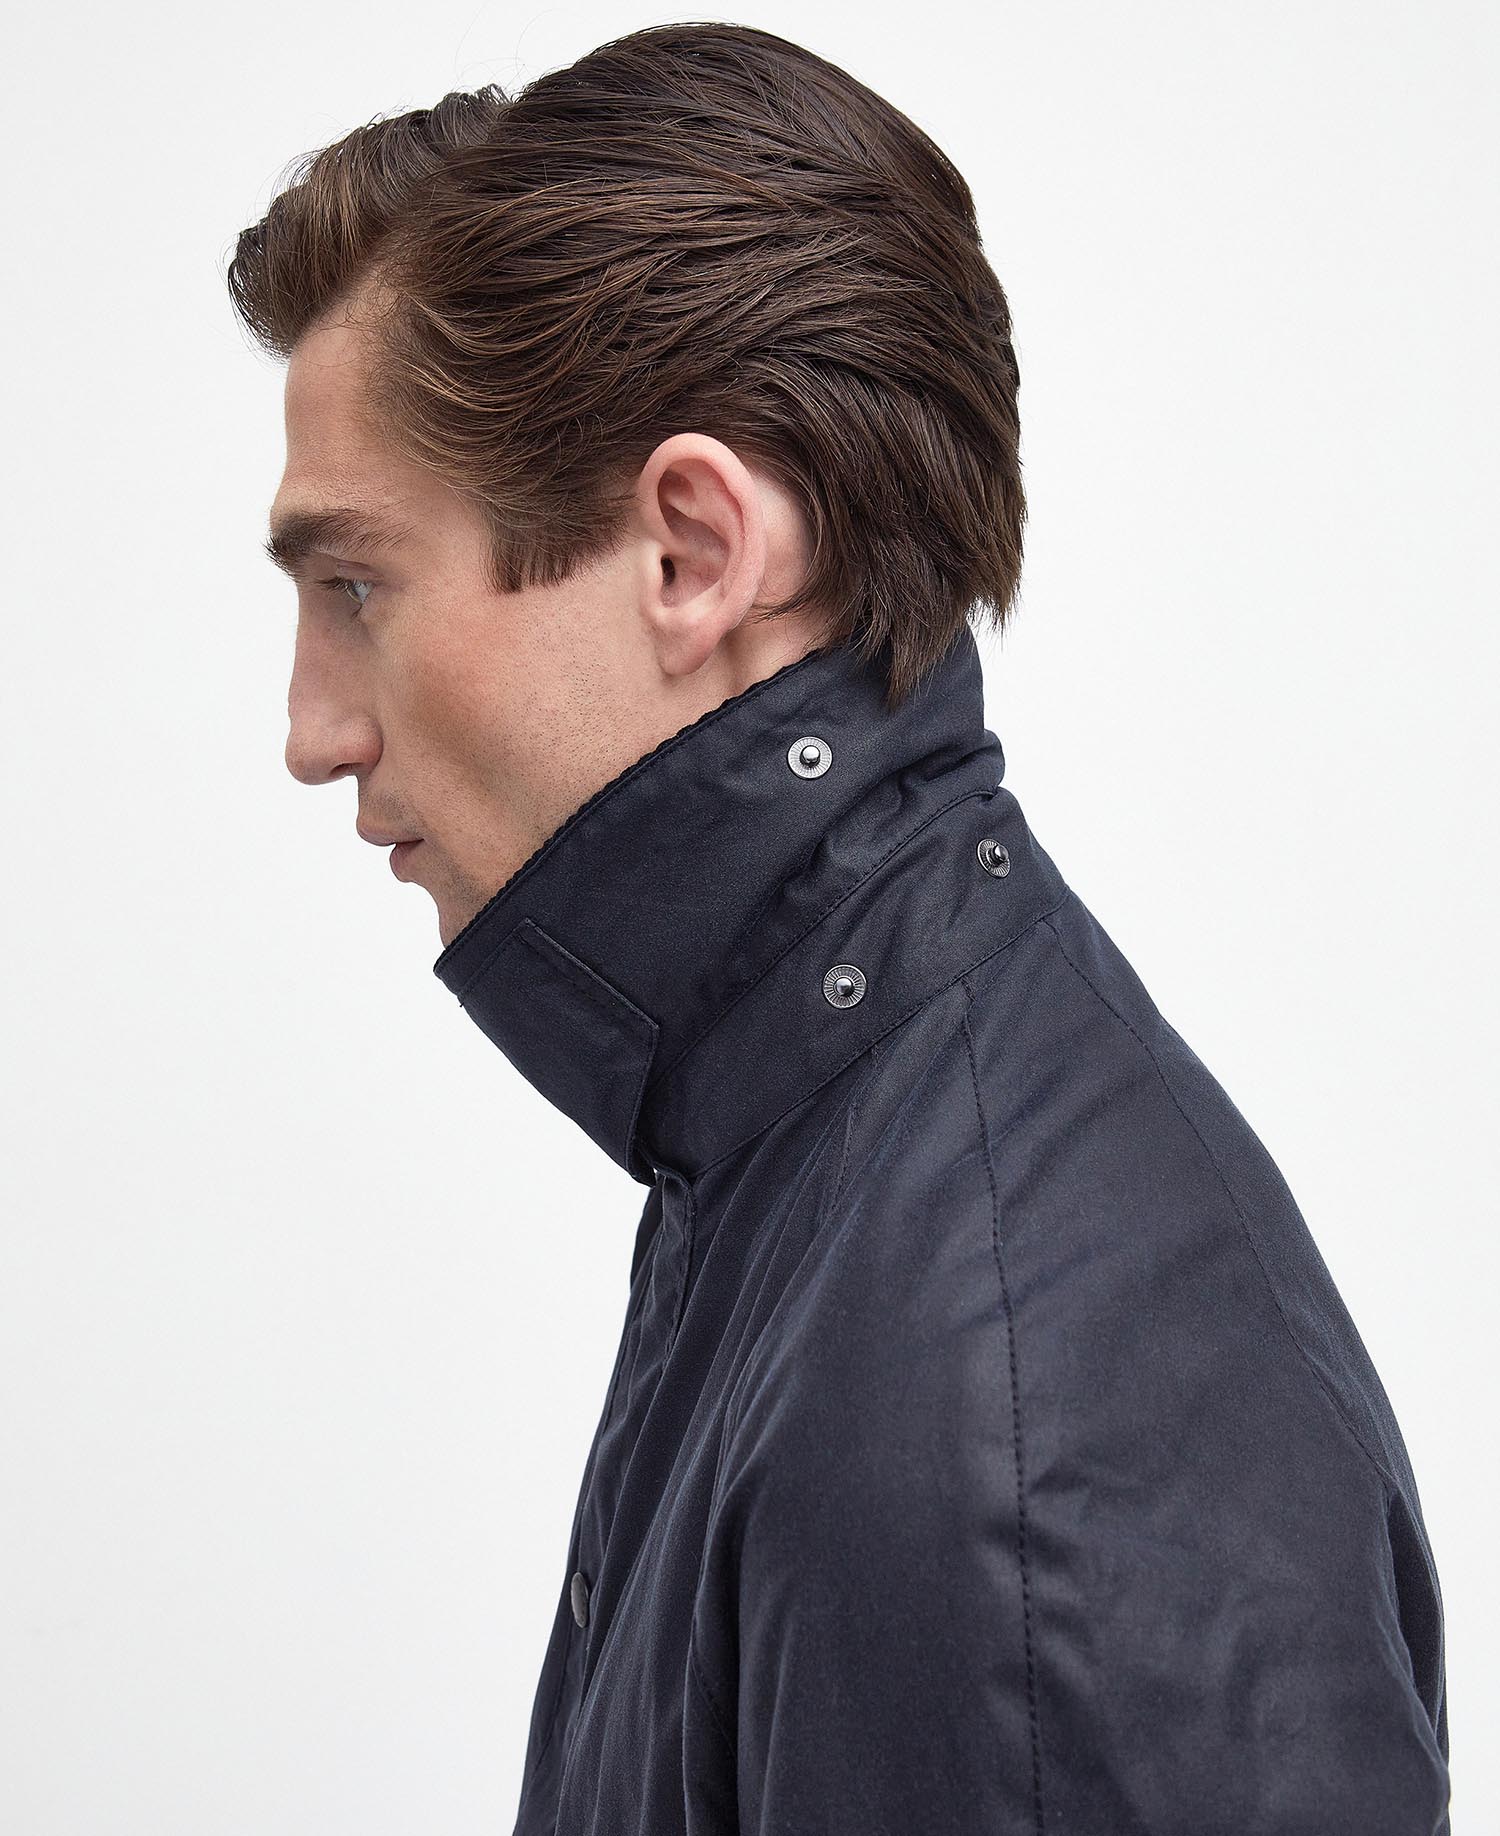 Barbour Ashby Wax Jacket in Navy   Barbour